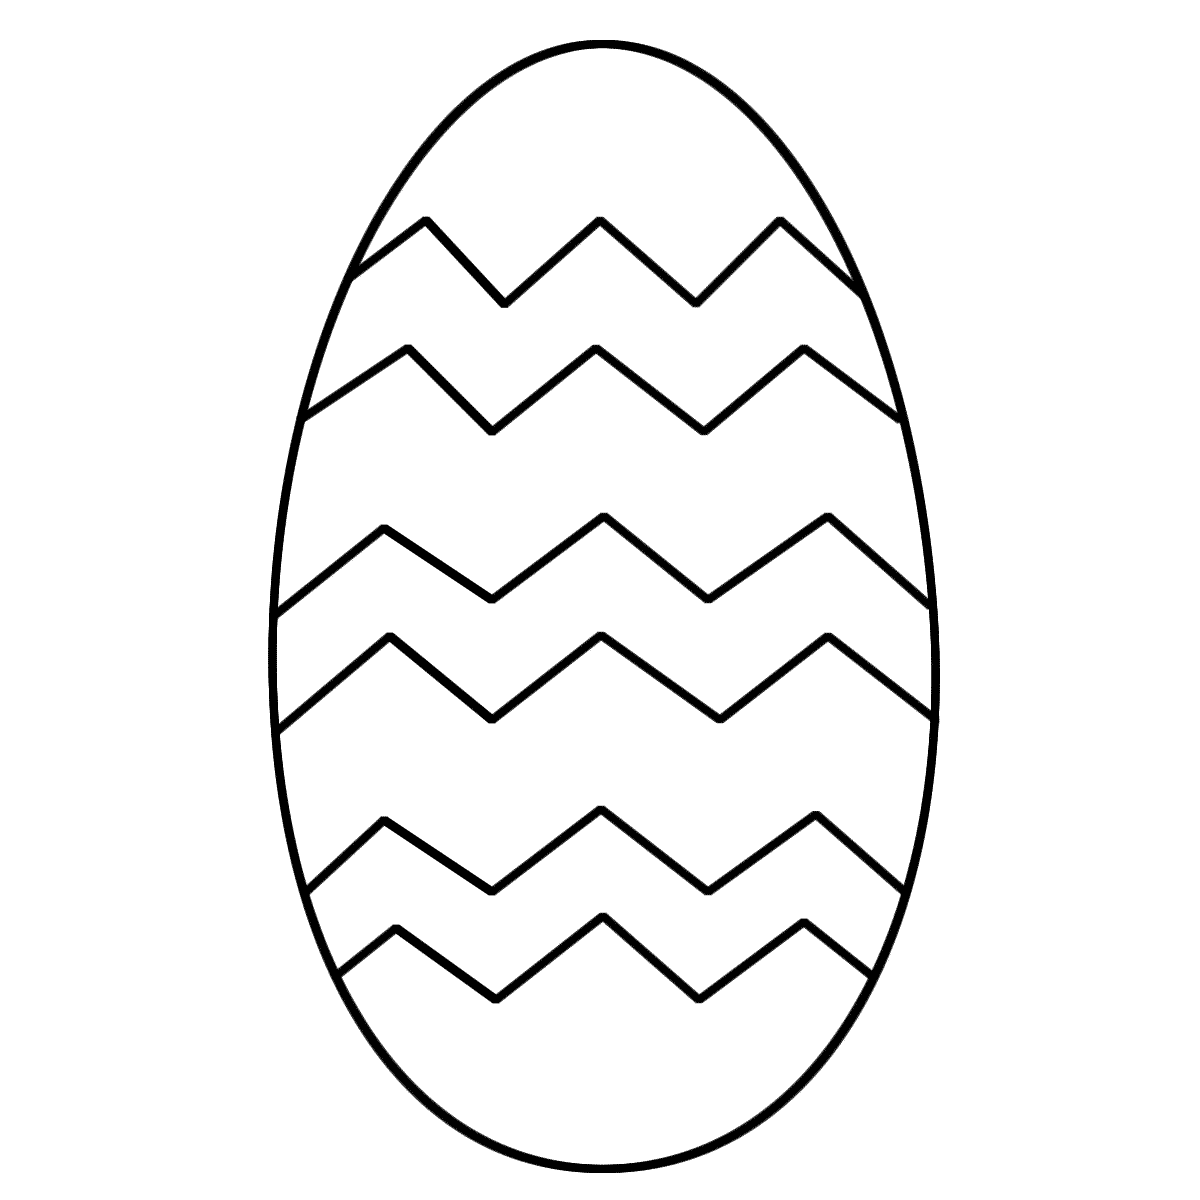 Free Printable Easter Egg Coloring Pages   ClipArt Best   ClipArt Best